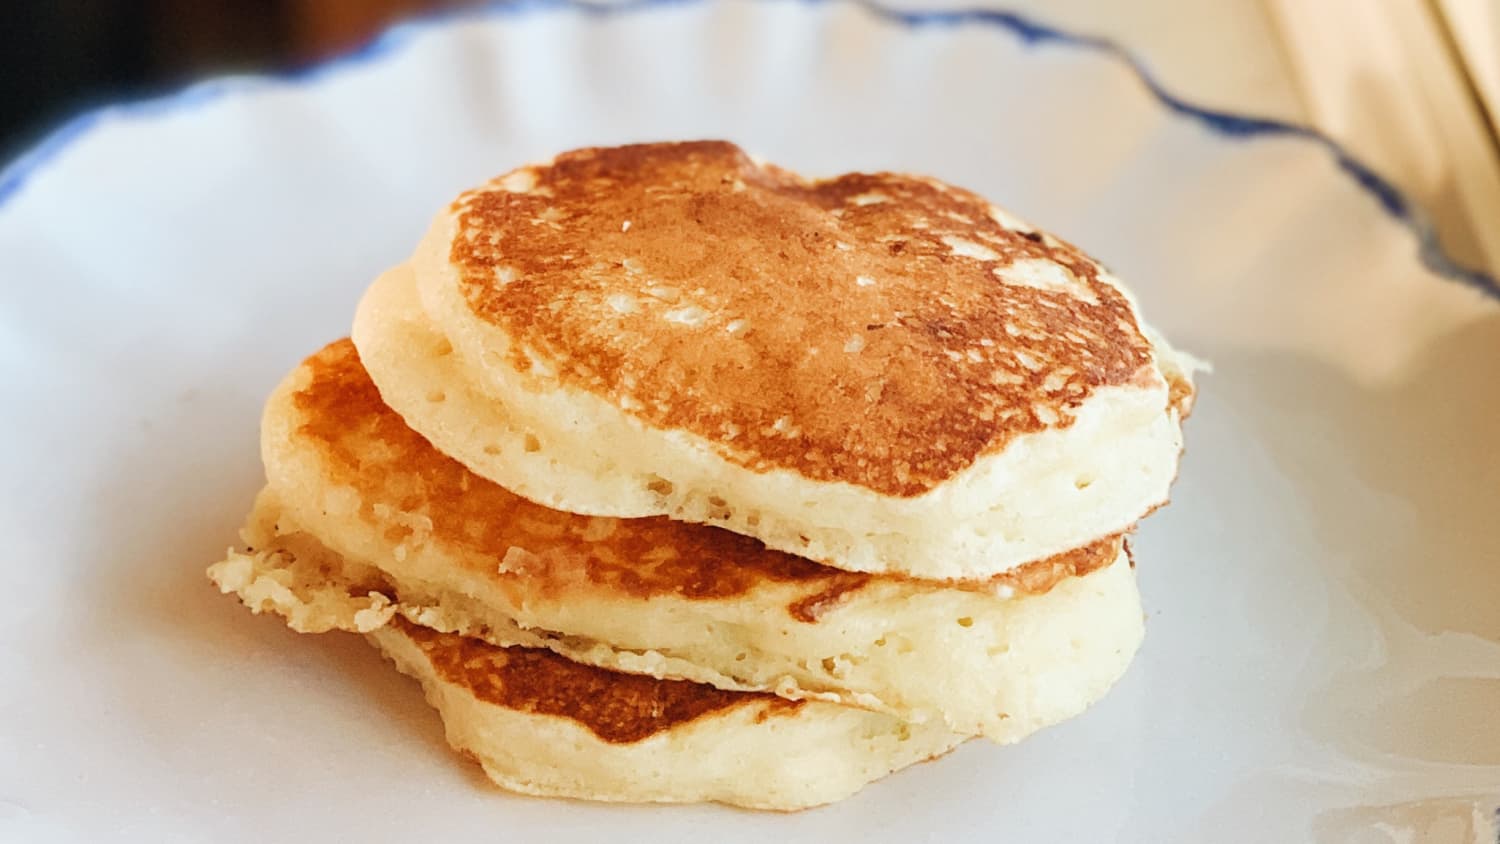 REVIEW: Make Perfect Pancakes 🥞 Every Time with the KPKitchen